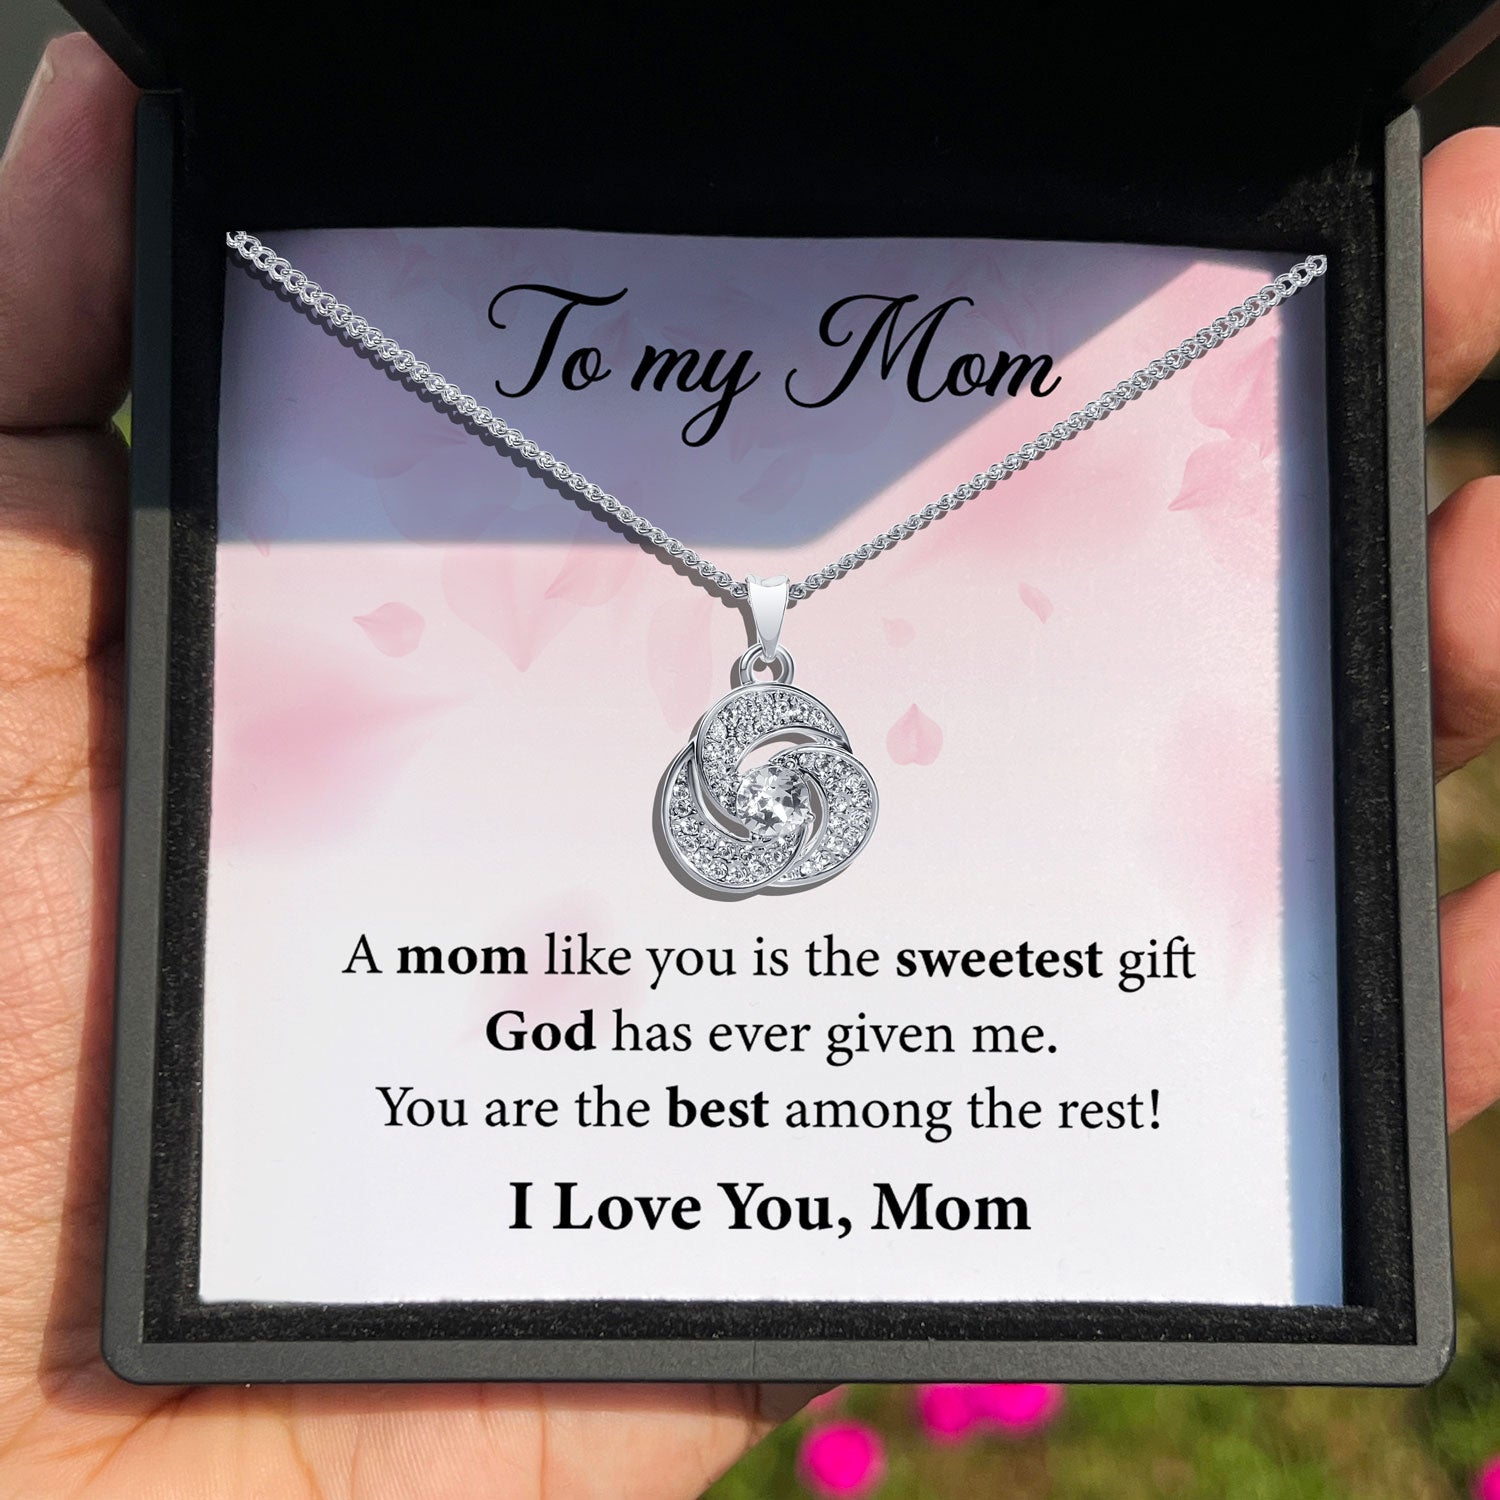 To My Mom - A Mom Like You Is The Sweetest Gift - Tryndi Love Knot Necklace